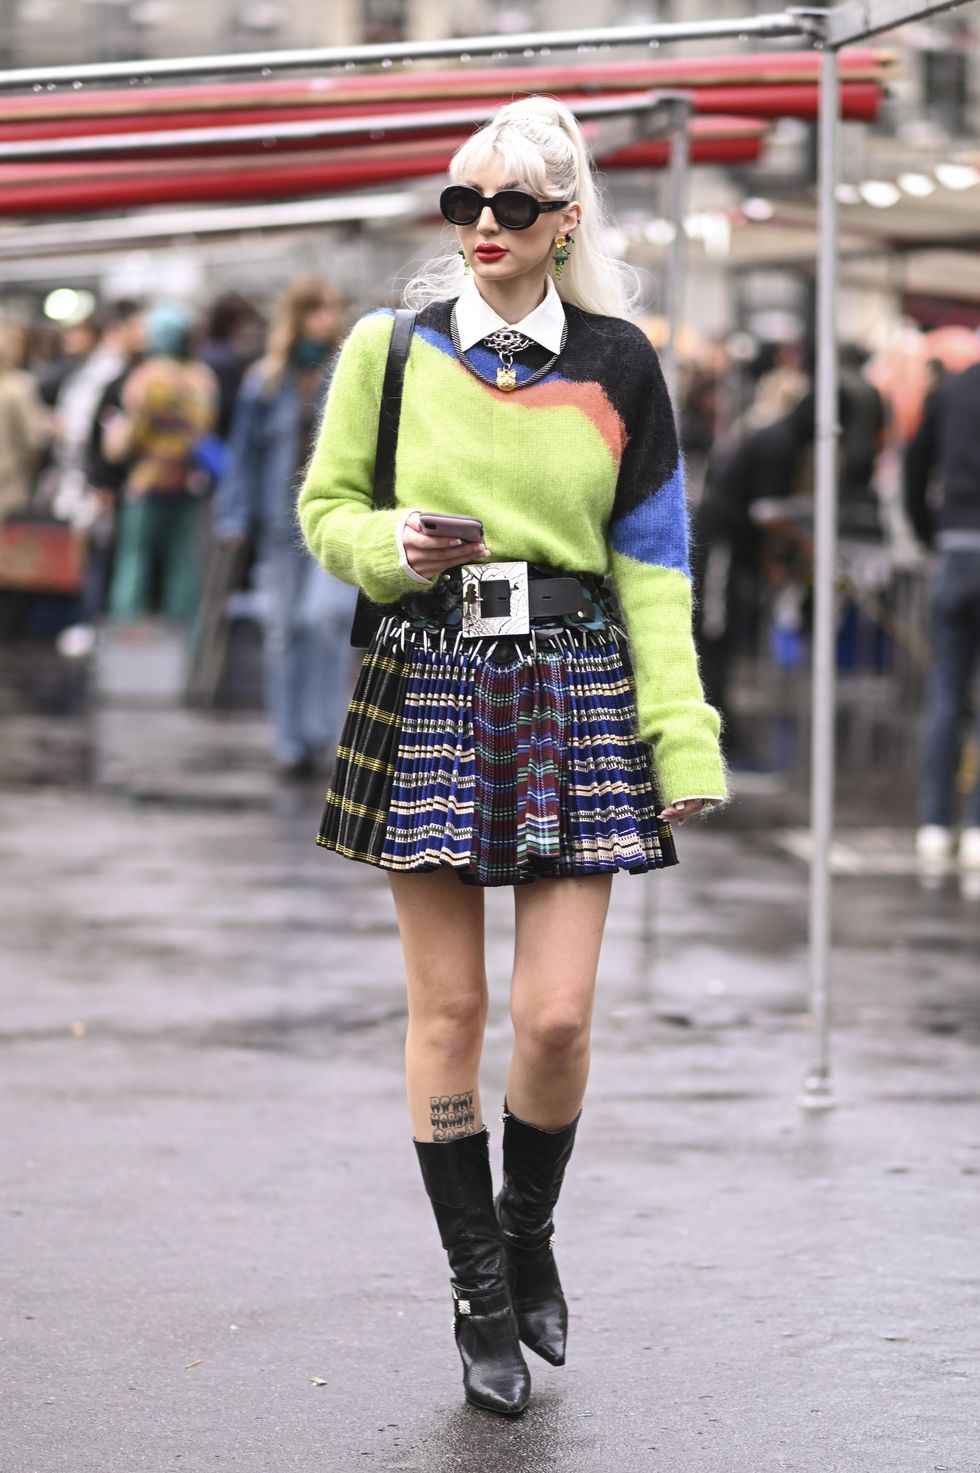 paris, france september 27 a guest is seen wearing a green and black sweater, black silver belt, plaid skirt, black boots and black sunglasses outside the koche show during paris fashion week ss 2023 on september 27, 2022 in paris, france photo by daniel zuchnikgetty images